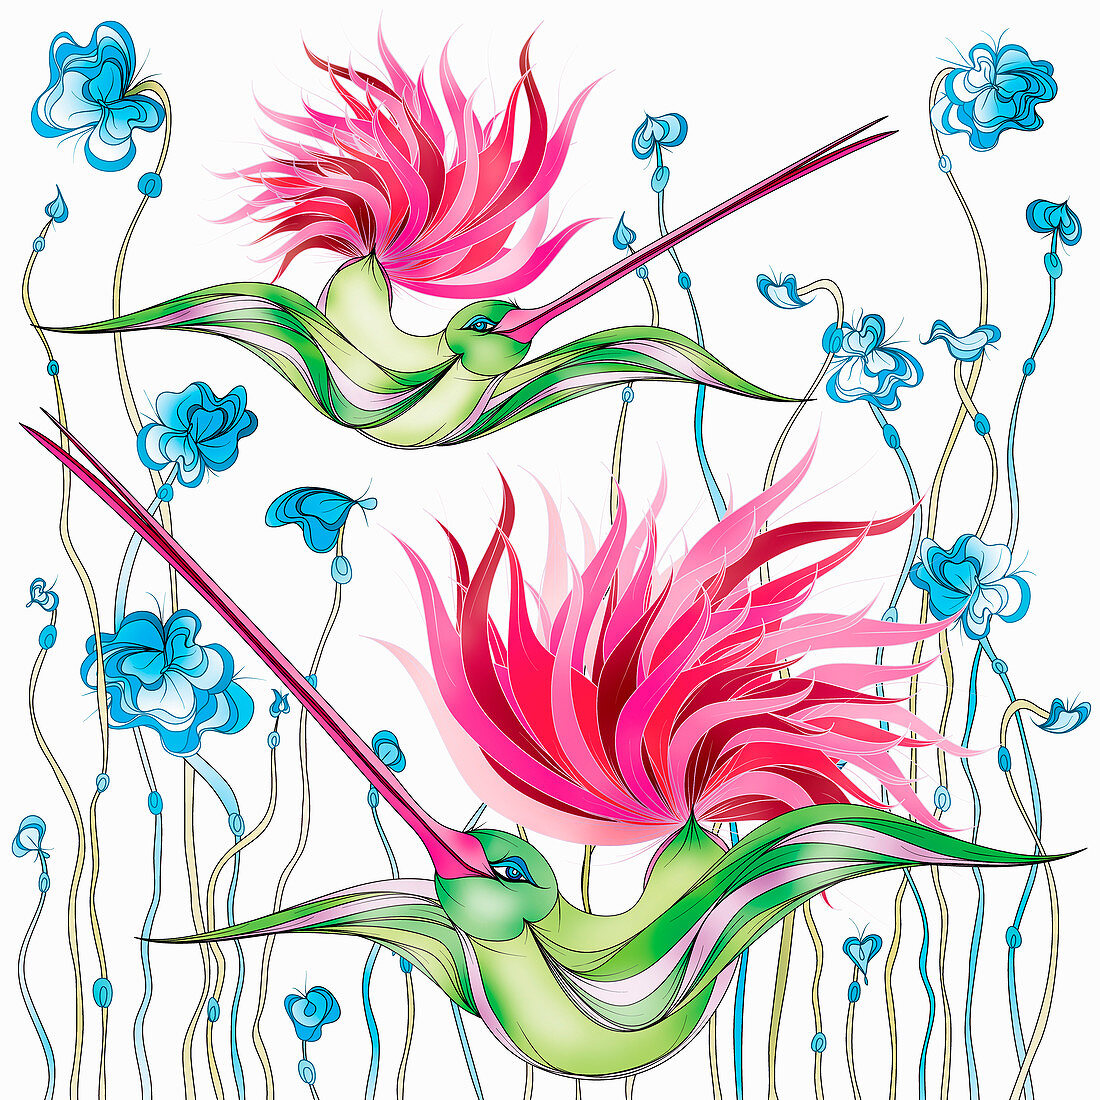 Hummingbirds with pink tails, illustration